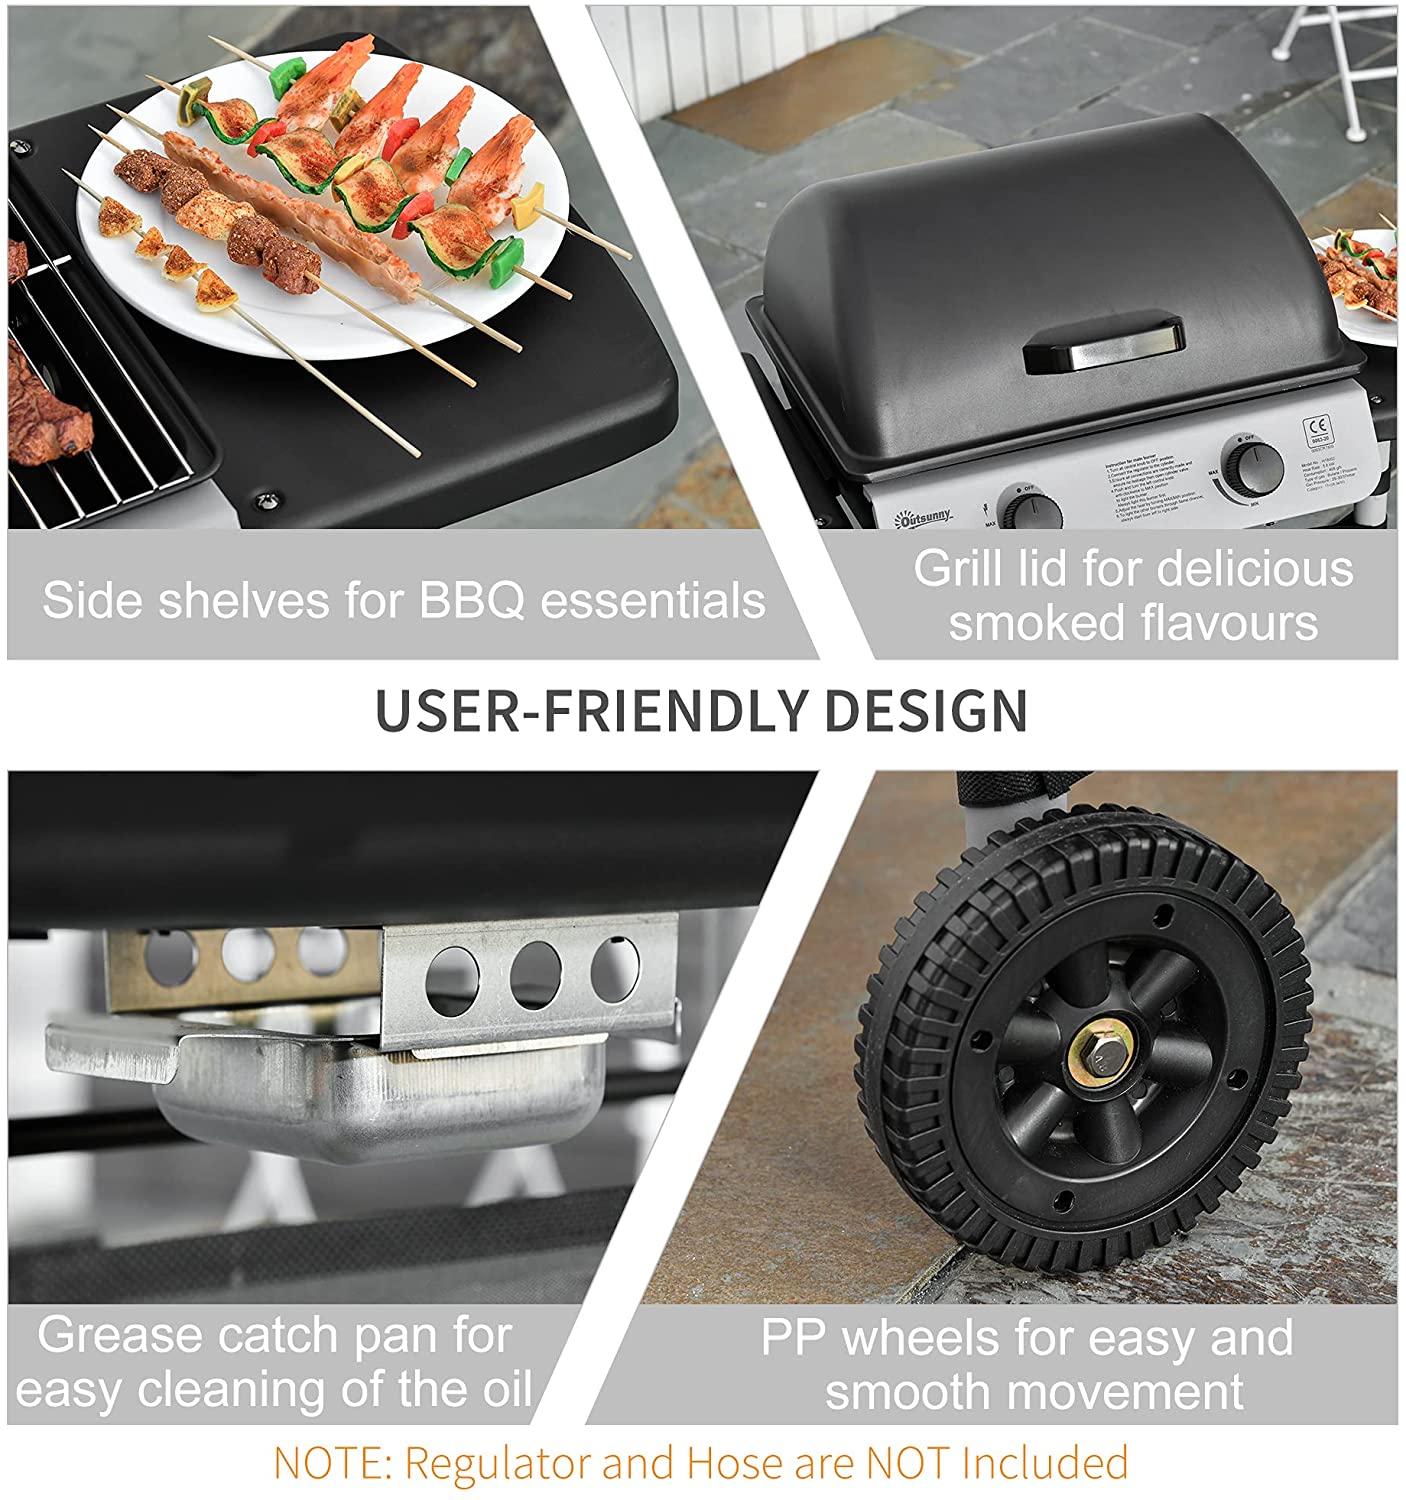 Outsunny Propane Gas Barbecue Grill 2 Burner Cooking BBQ Grill 5.6 kW w/ Side Shelves